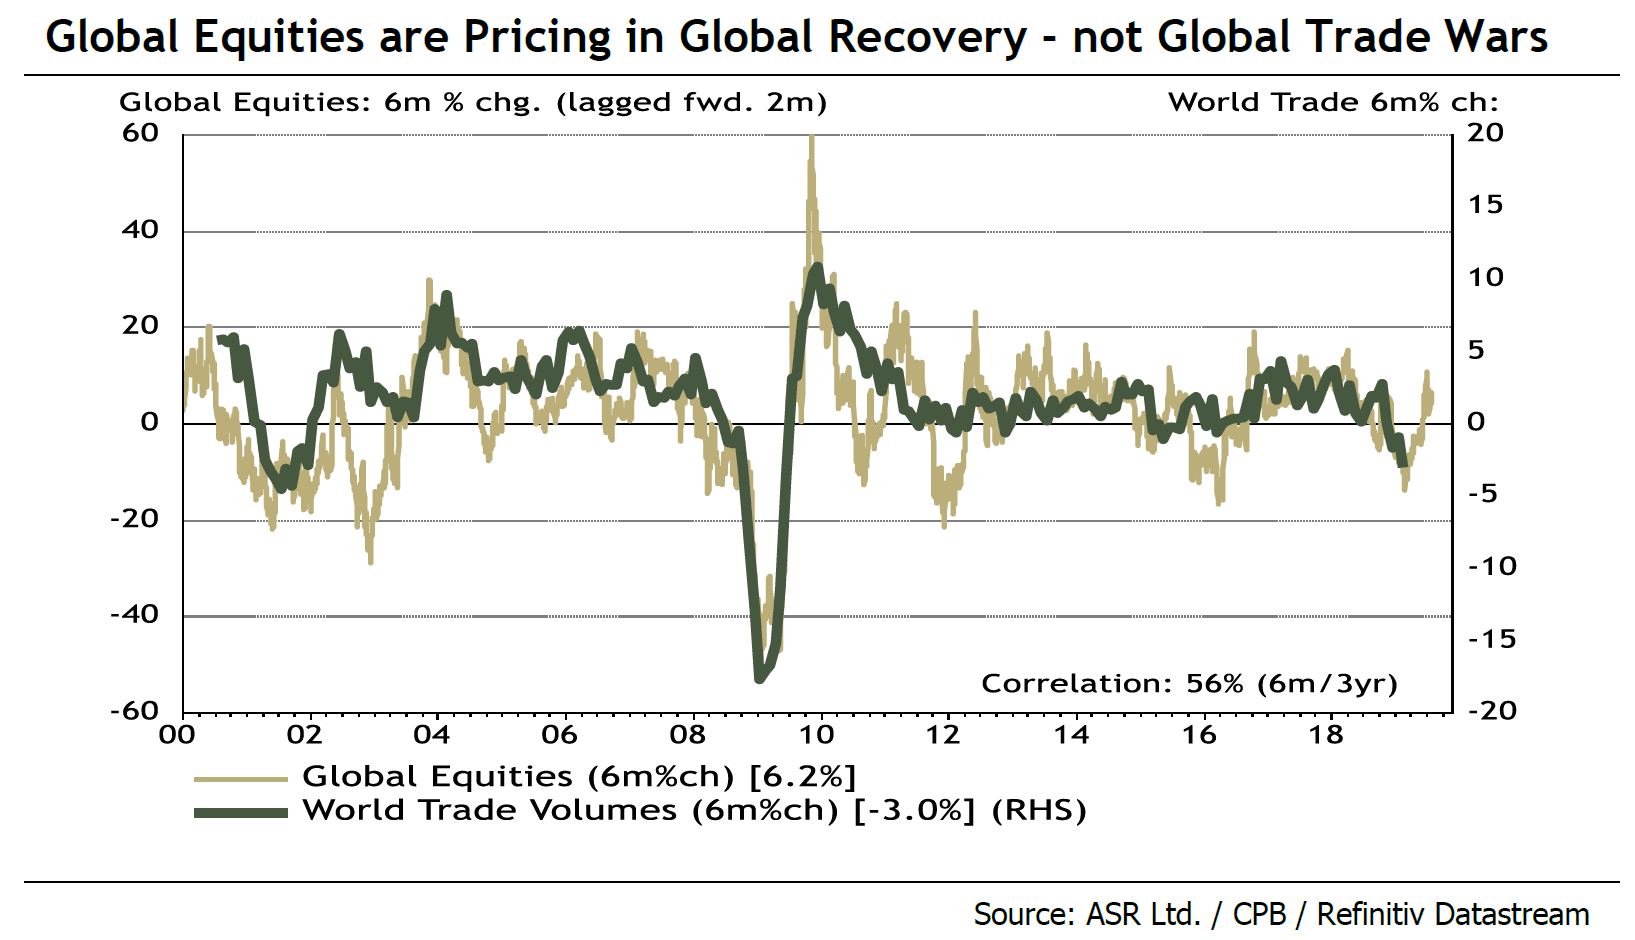 Global Equities Are Pricing in Global Recovery